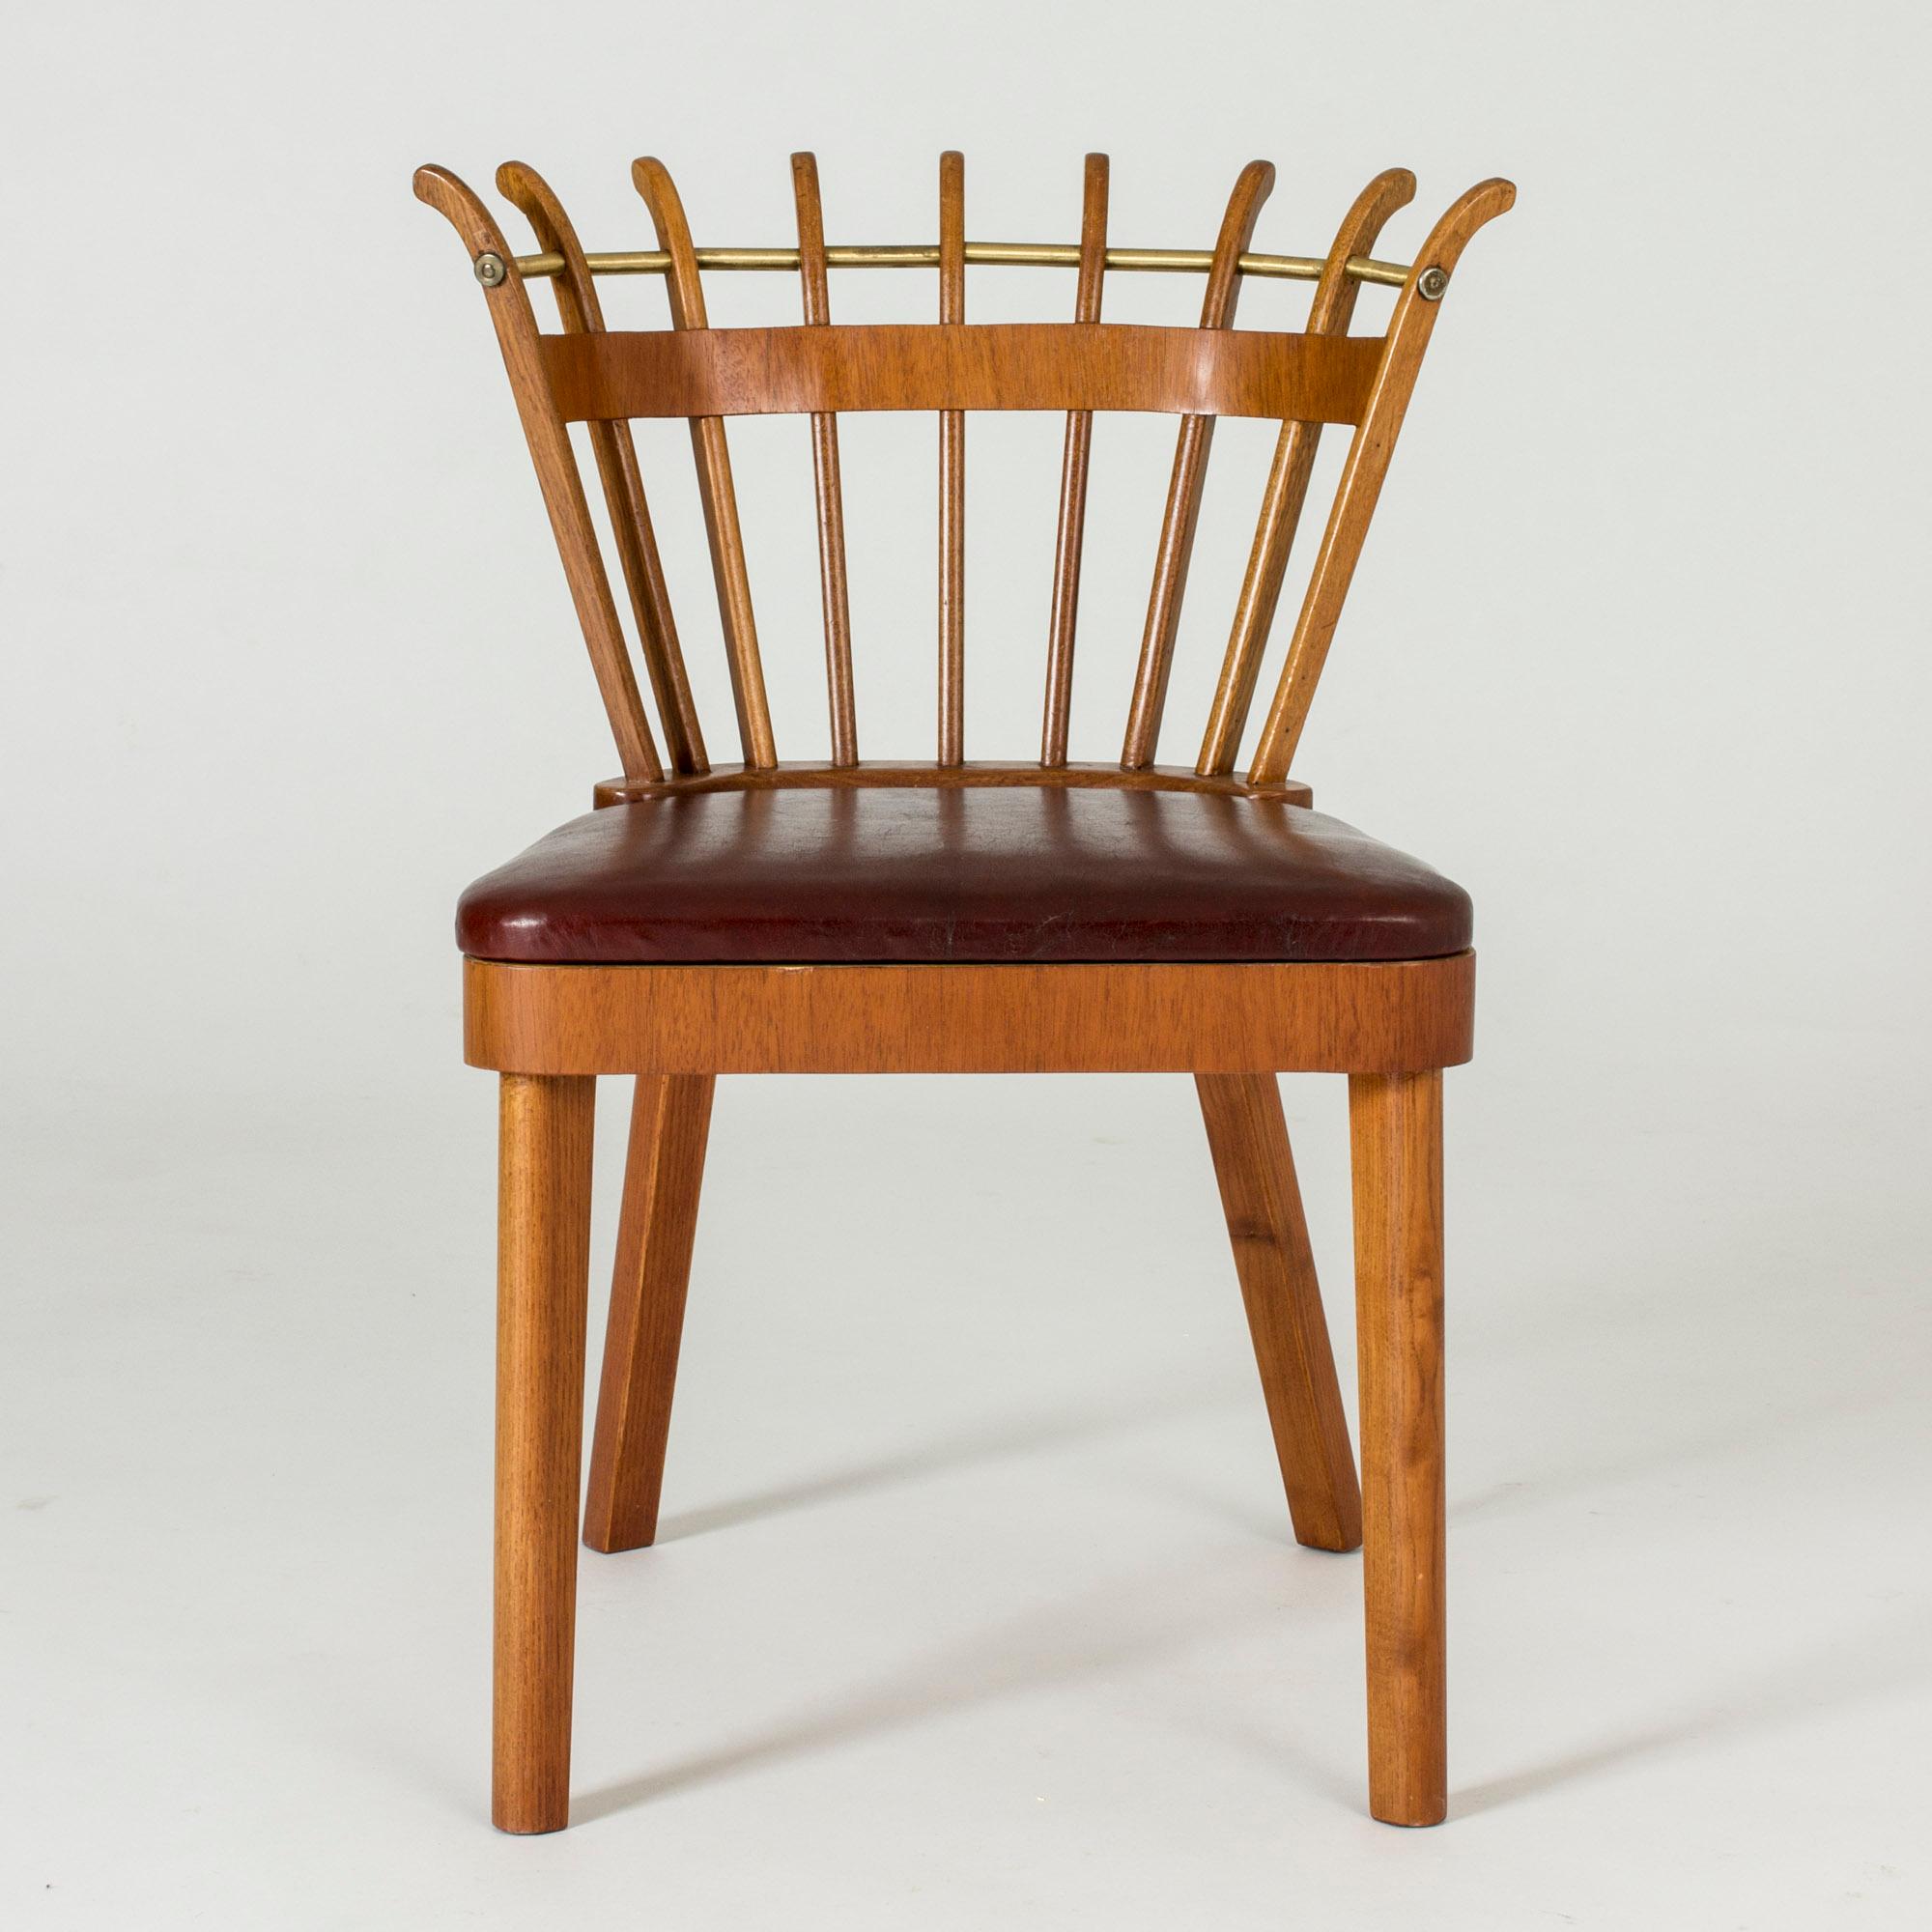 Mid-20th Century Pair of Swedish Modern Occasional Chairs, Sweden, 1946